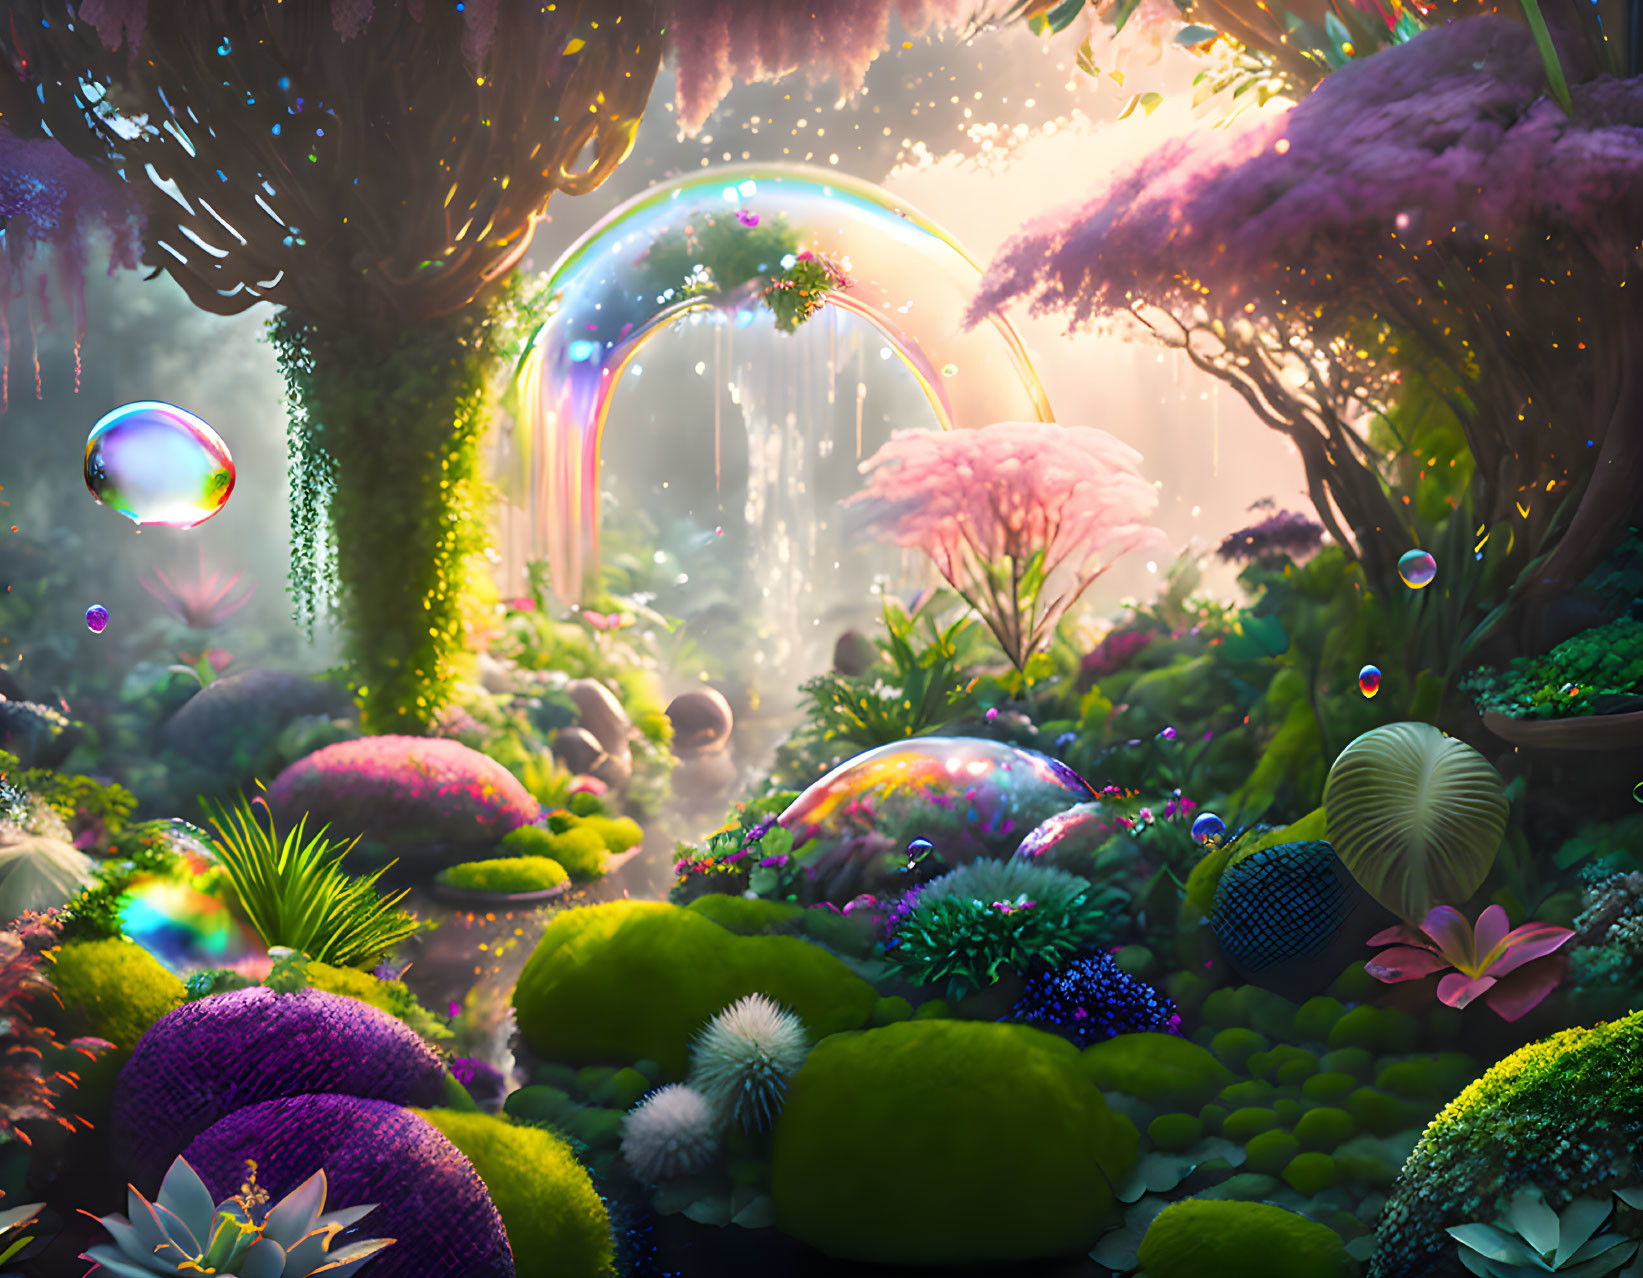 Colorful Fantasy Forest with Rainbow, Glowing Plants, Mushrooms, and Bubbles